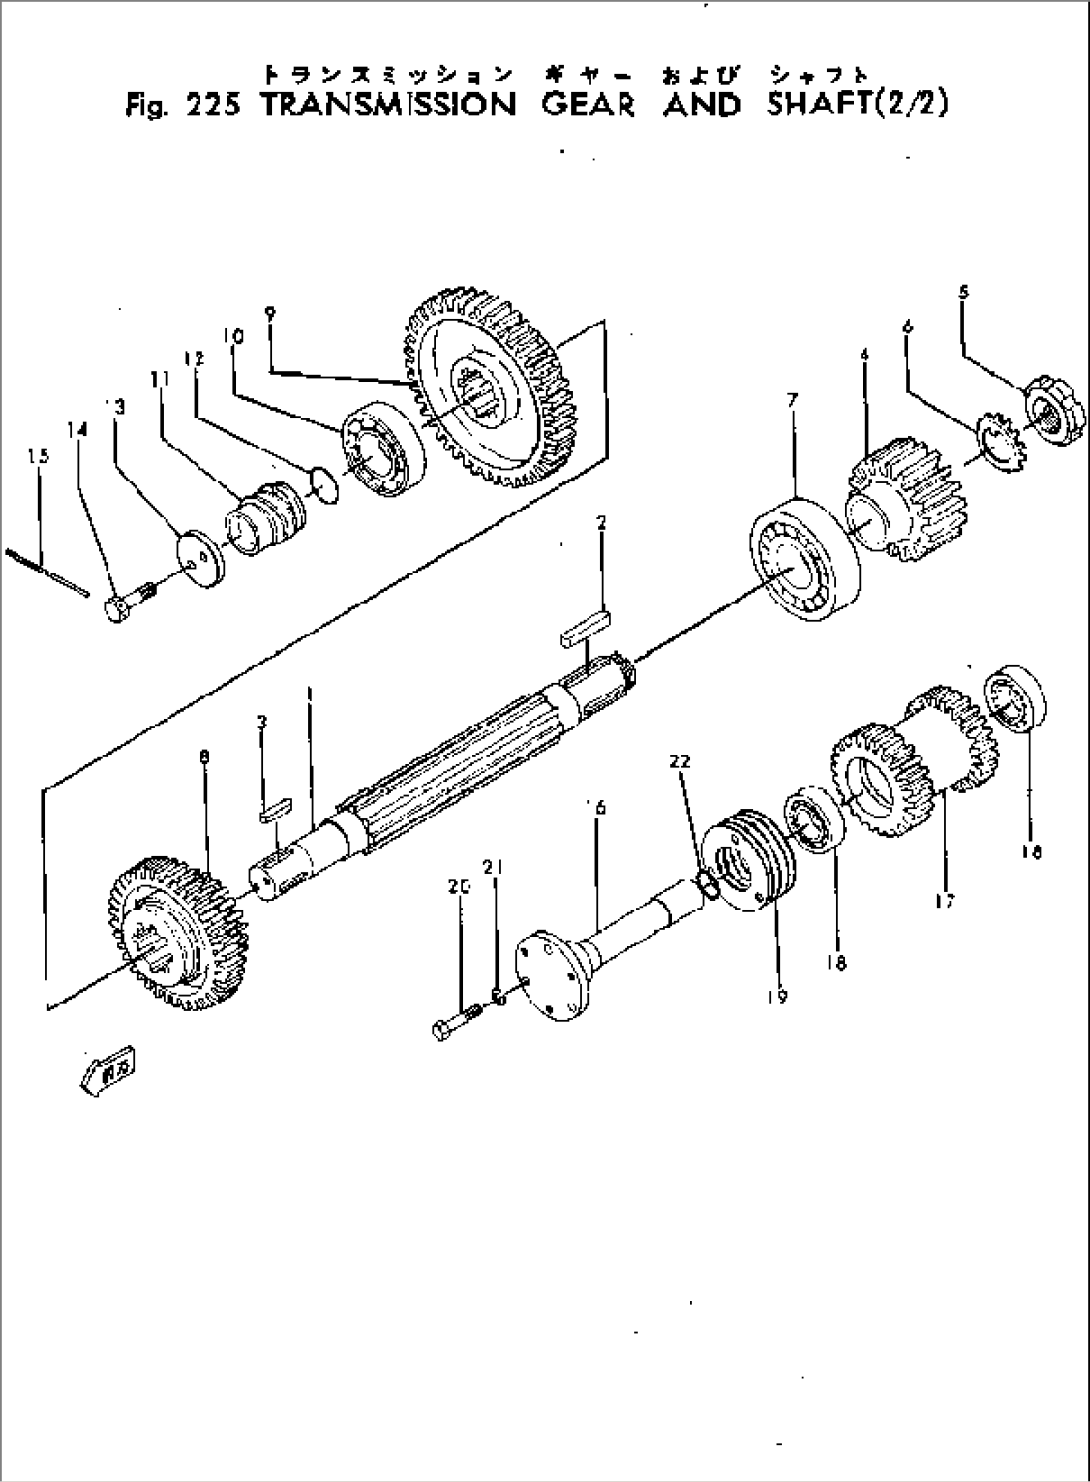 TRANSMISSION GEAR AND SHAFT (1/2)